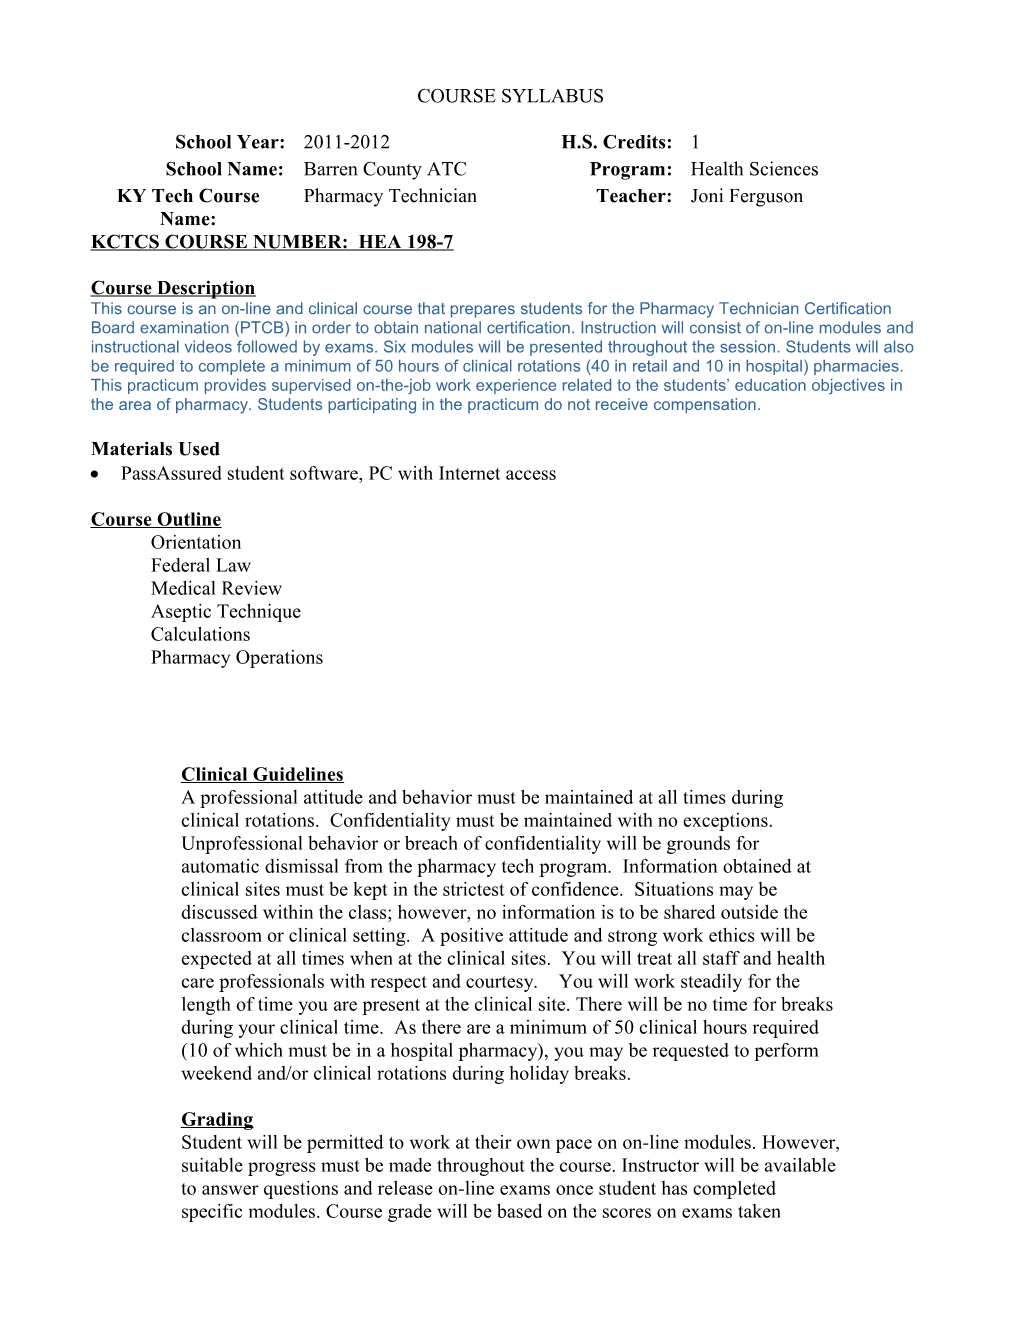 Pharmacy Technician Syllabus Page 1 of 2